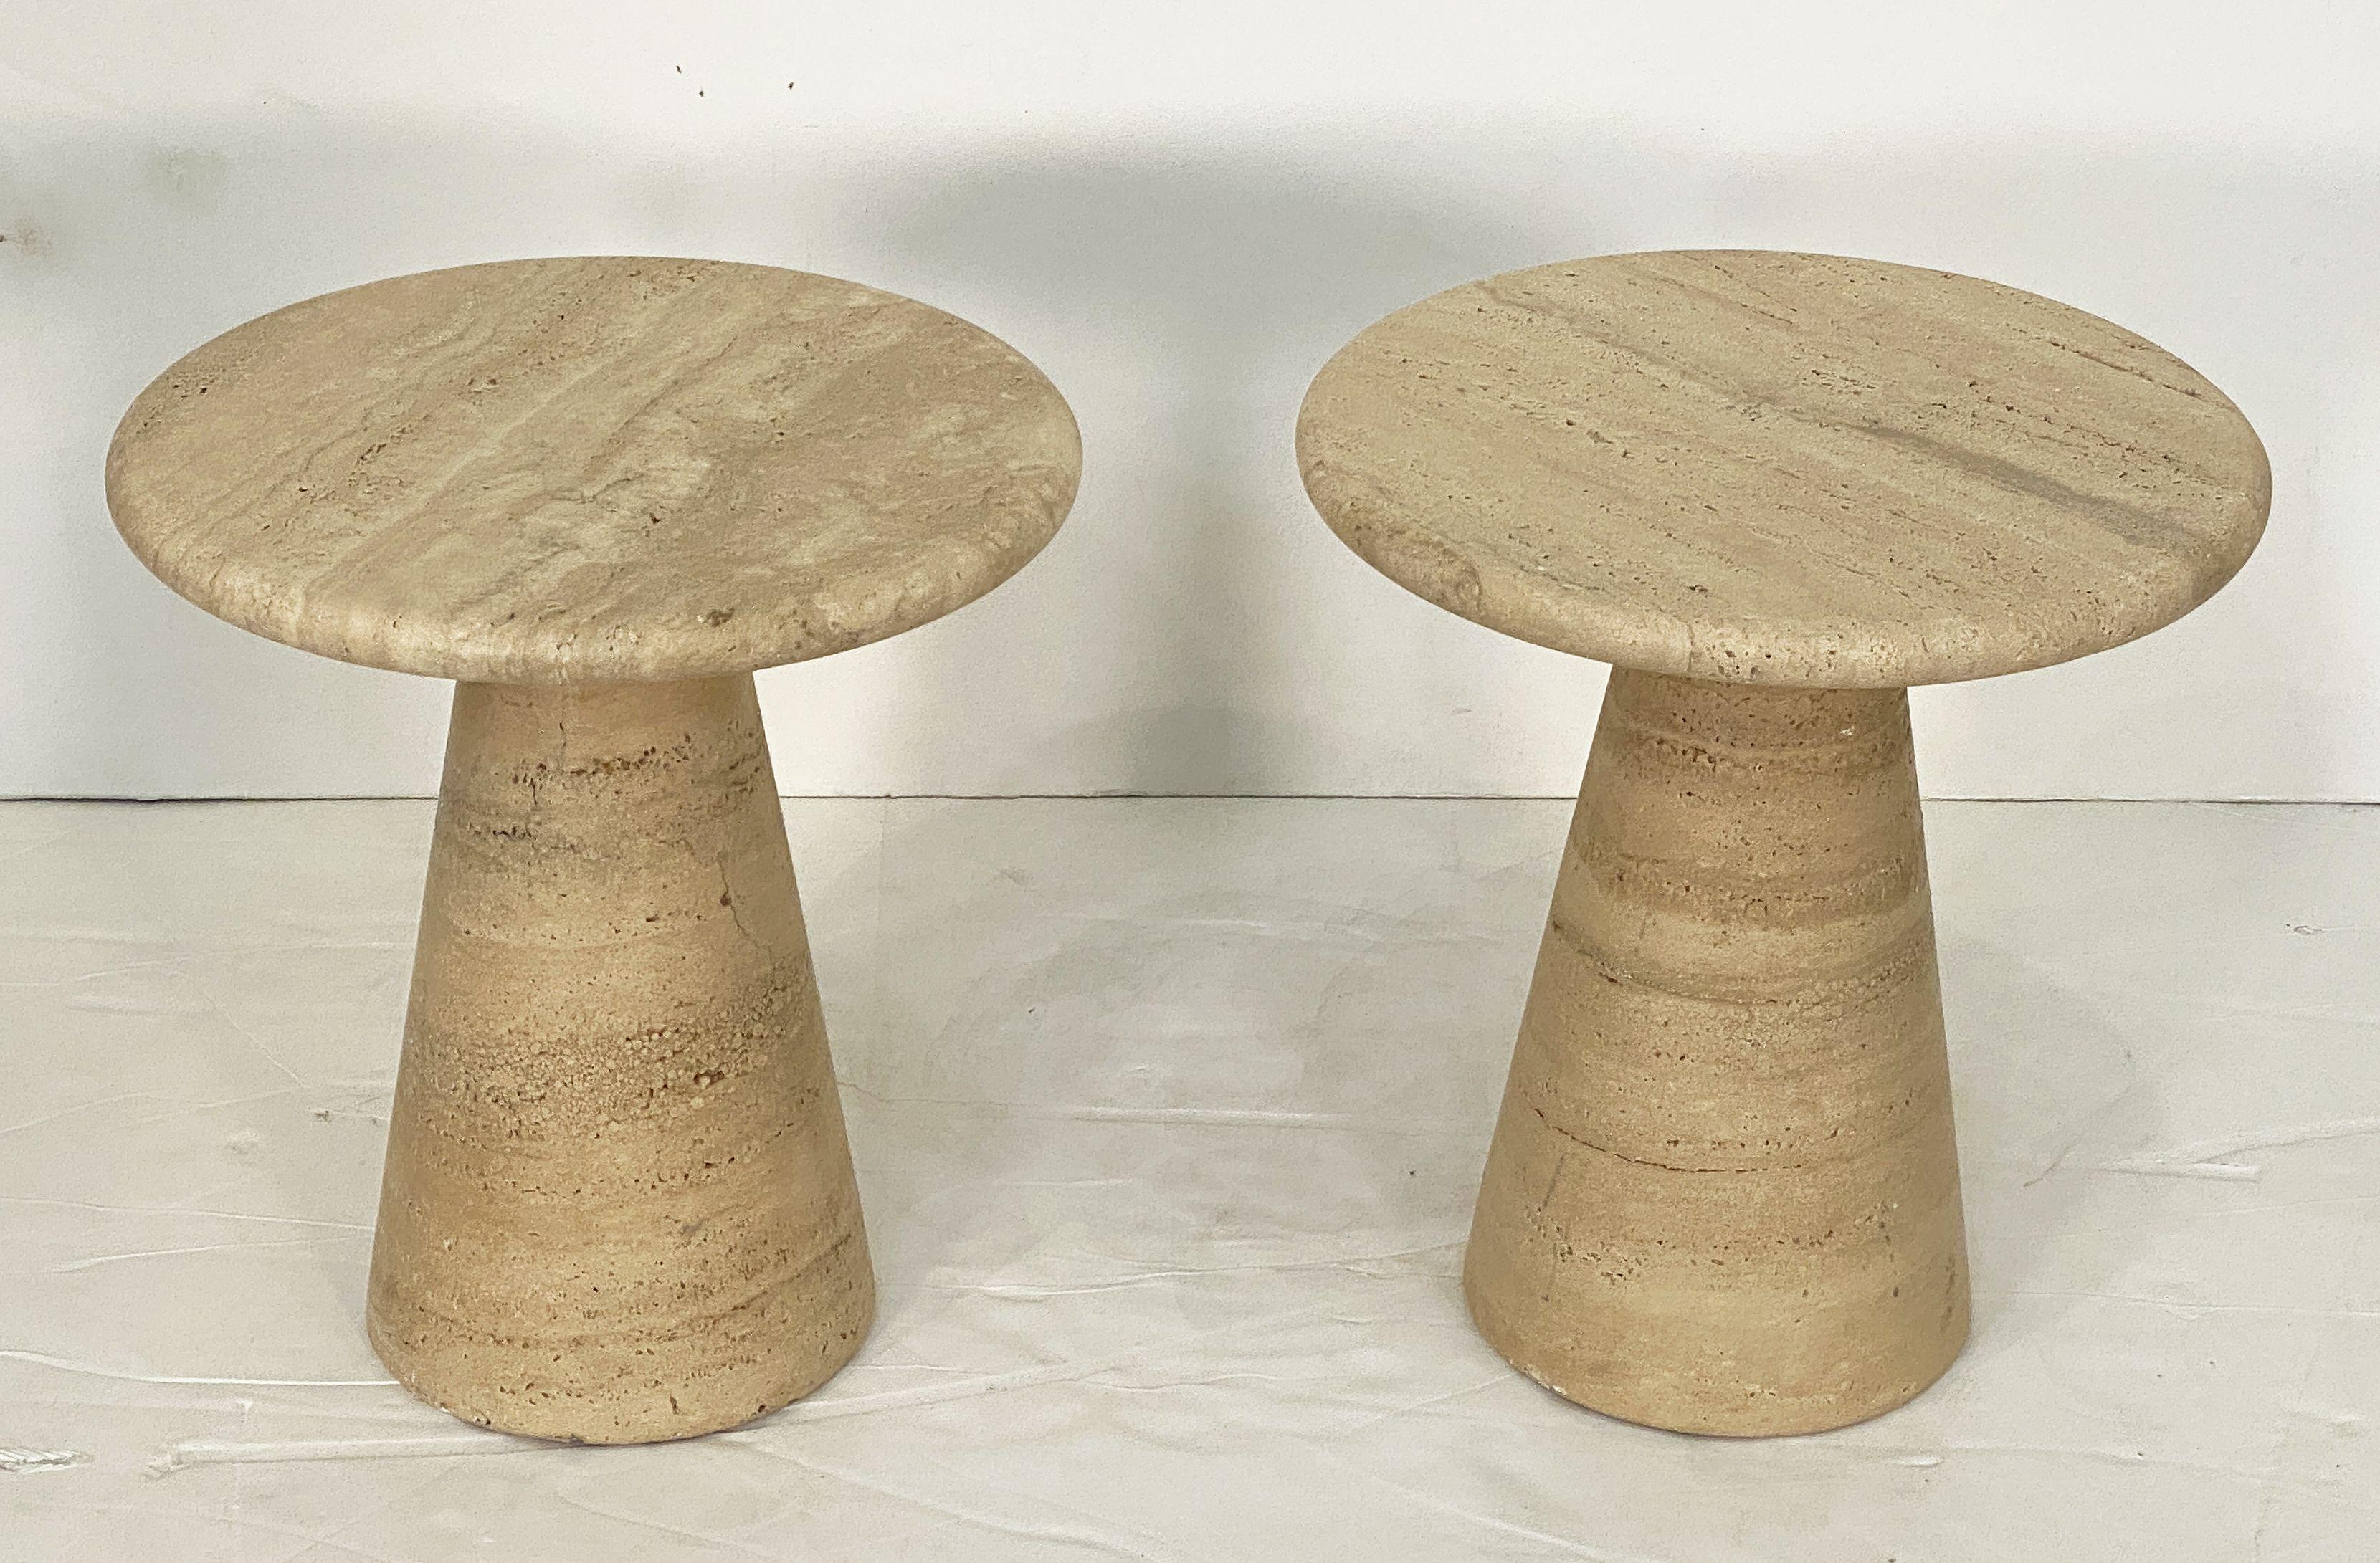 Modernist Conical Table of Travertine Stone from Italy (Four Available) For Sale 12